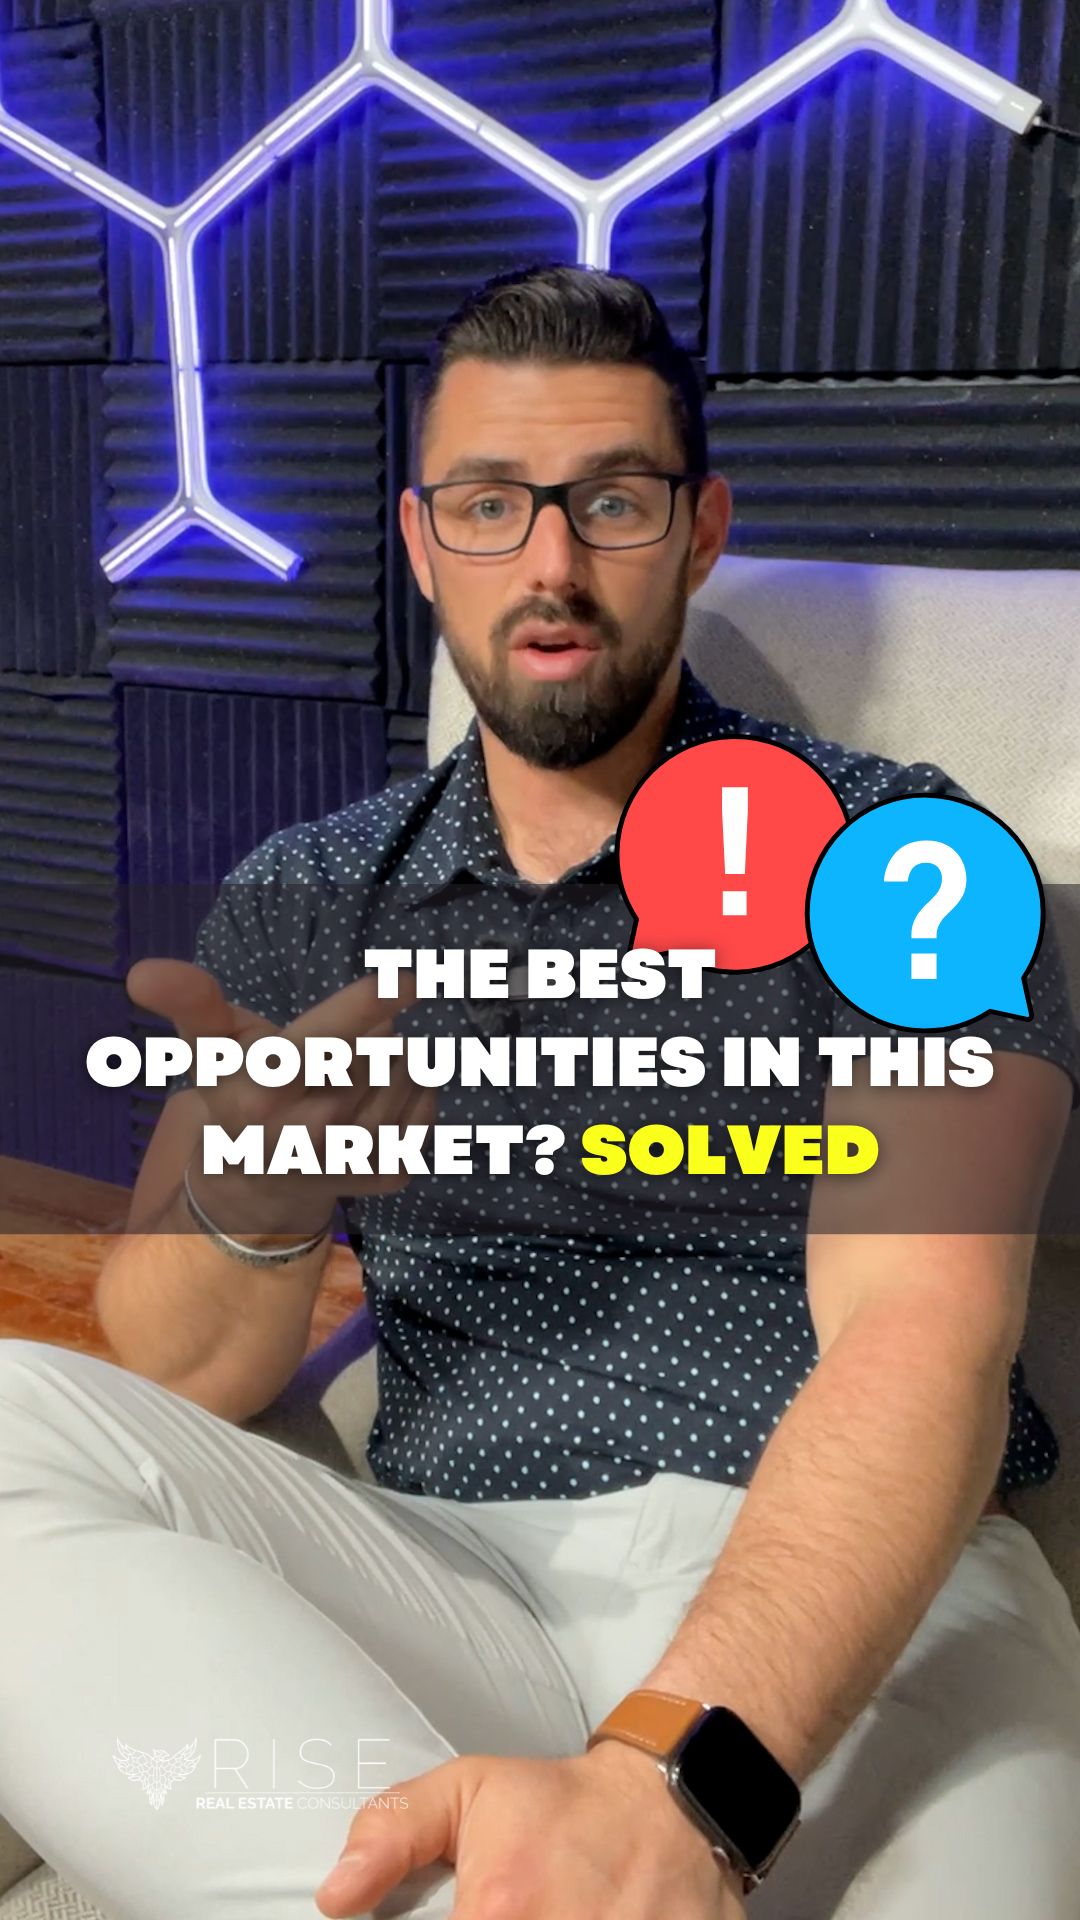 Who has the best opportunities in the market?